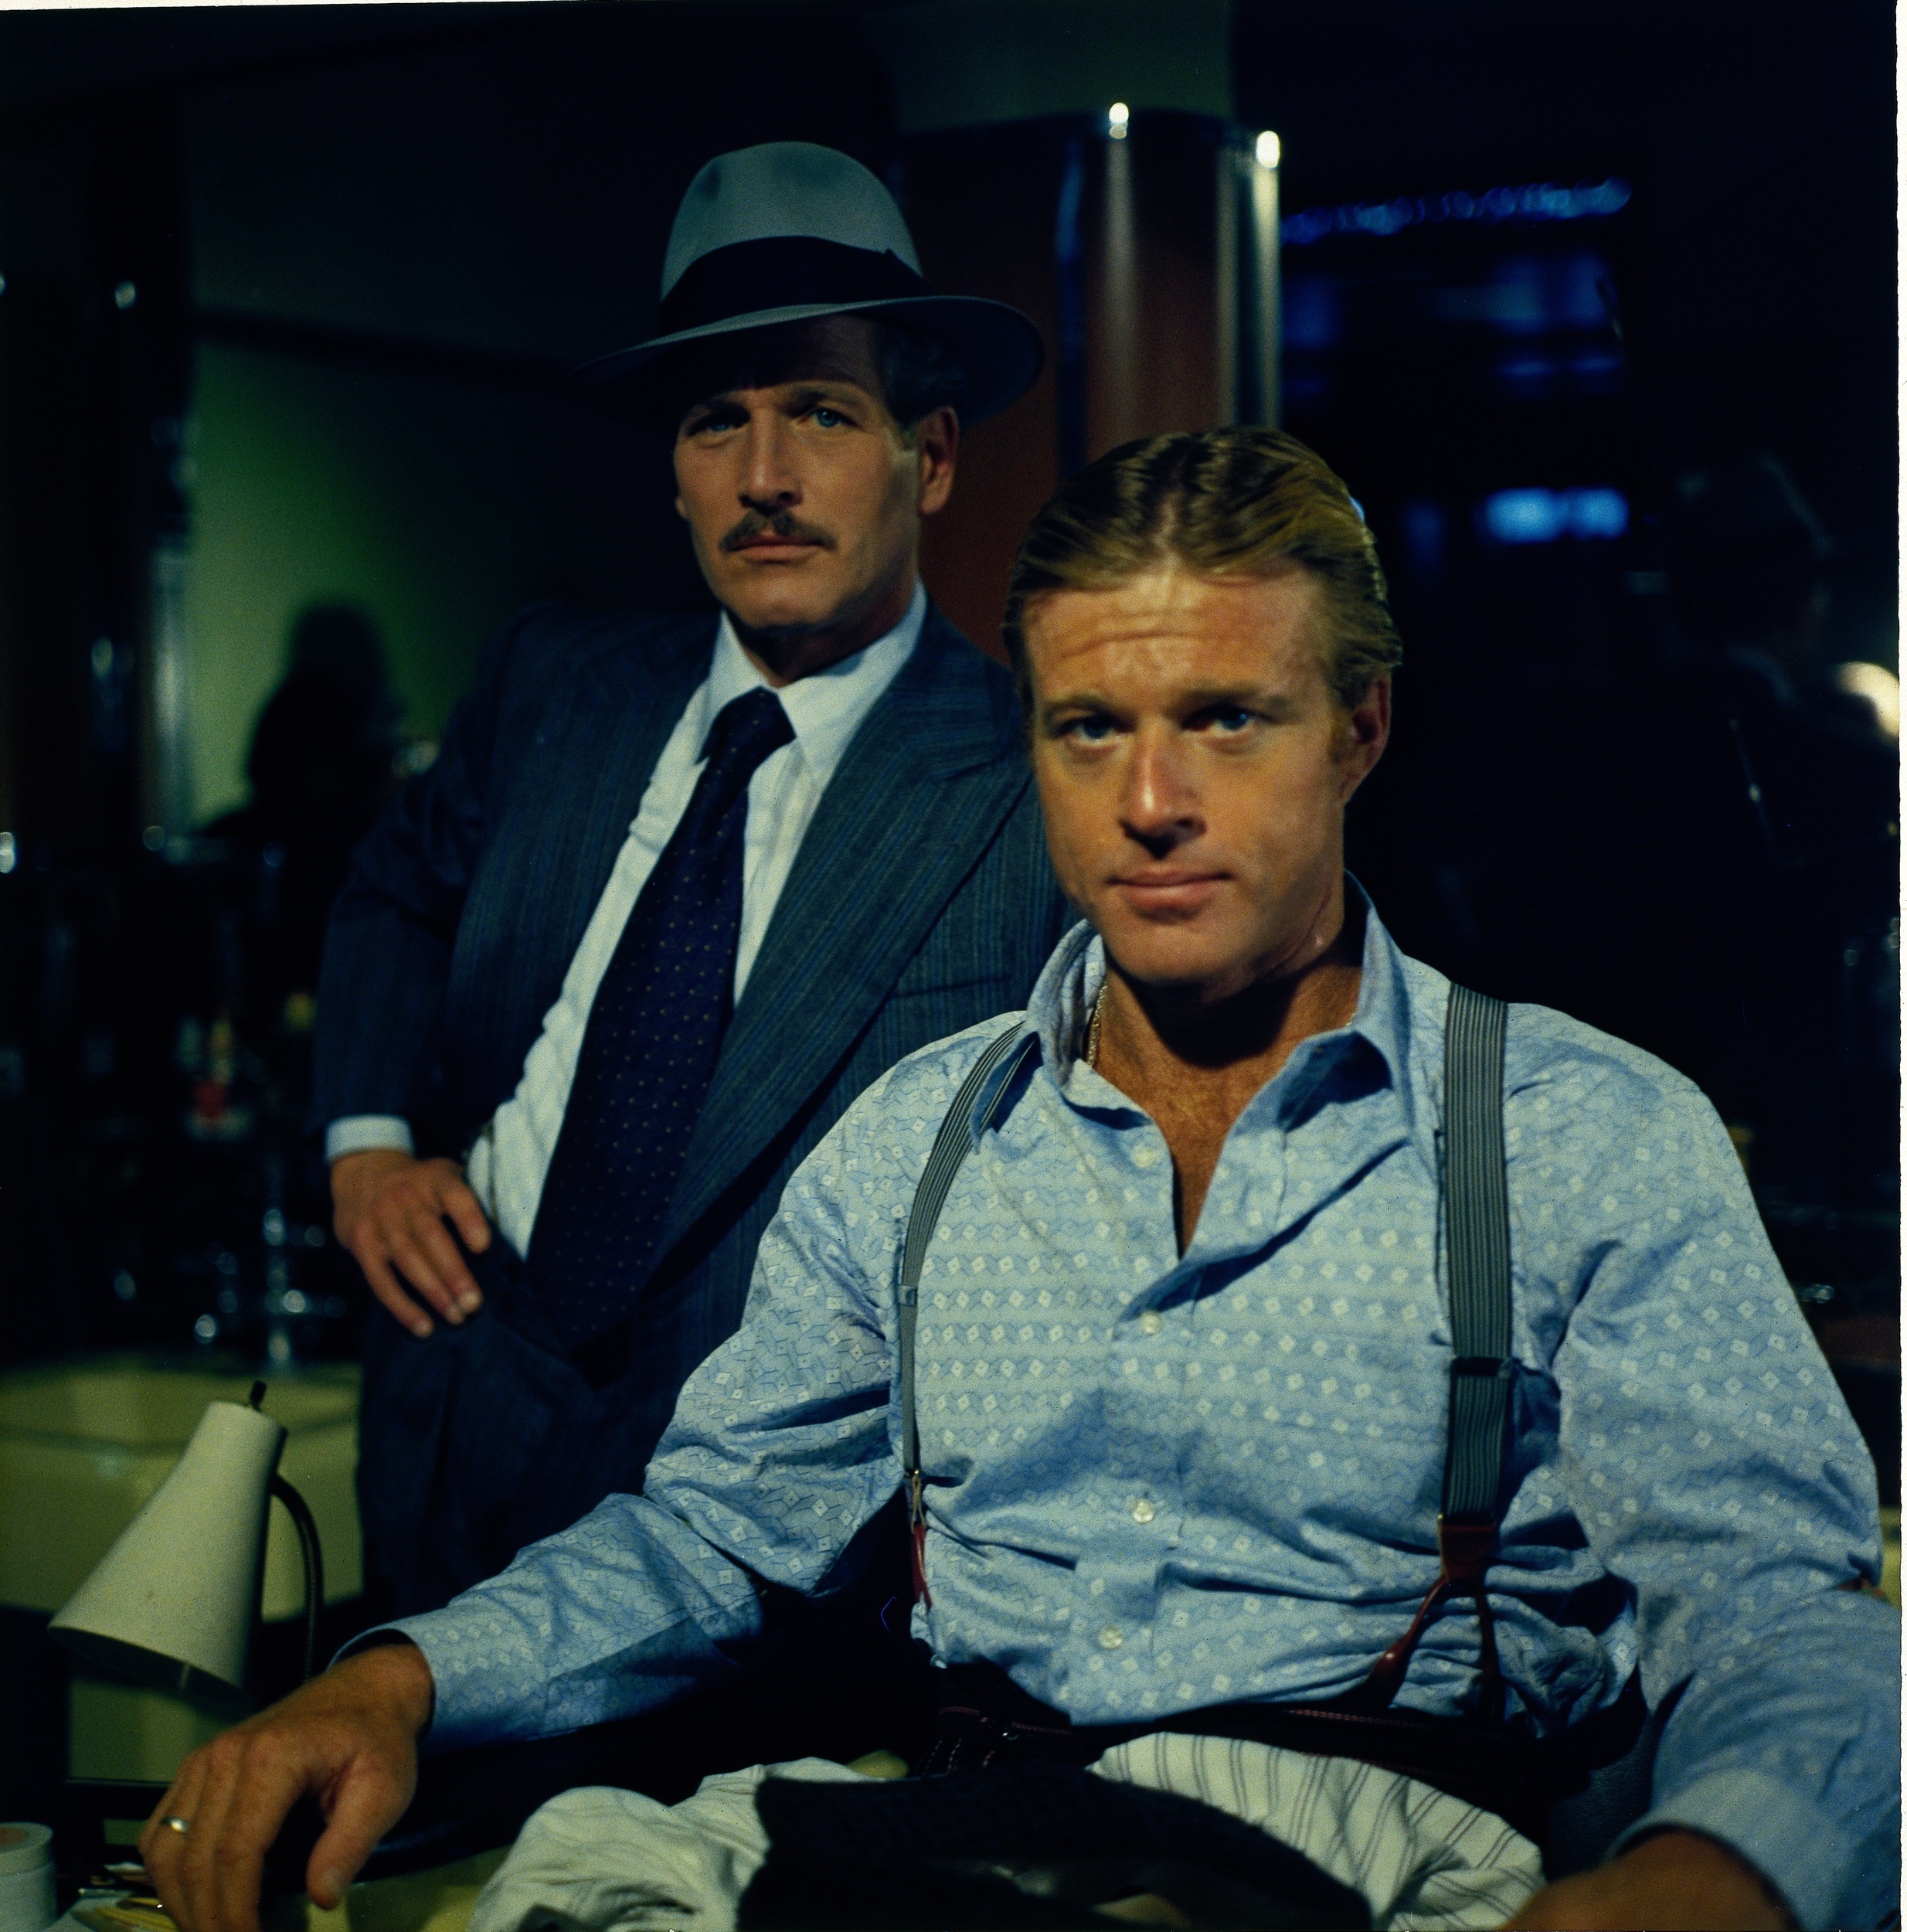 <p>“The Sting” reunited the stars of “Butch Cassidy and the Sundance Kid” in Newman and Redford. That’s not all, though. Both movies were also directed by George Roy Hill, who was nominated for Best Director for “Butch Cassidy.”</p><p>You may also like: <a href='https://www.yardbarker.com/entertainment/articles/the_25_best_episodes_of_cheers_032524/s1__37700279'>The 25 best episodes of 'Cheers'</a></p>